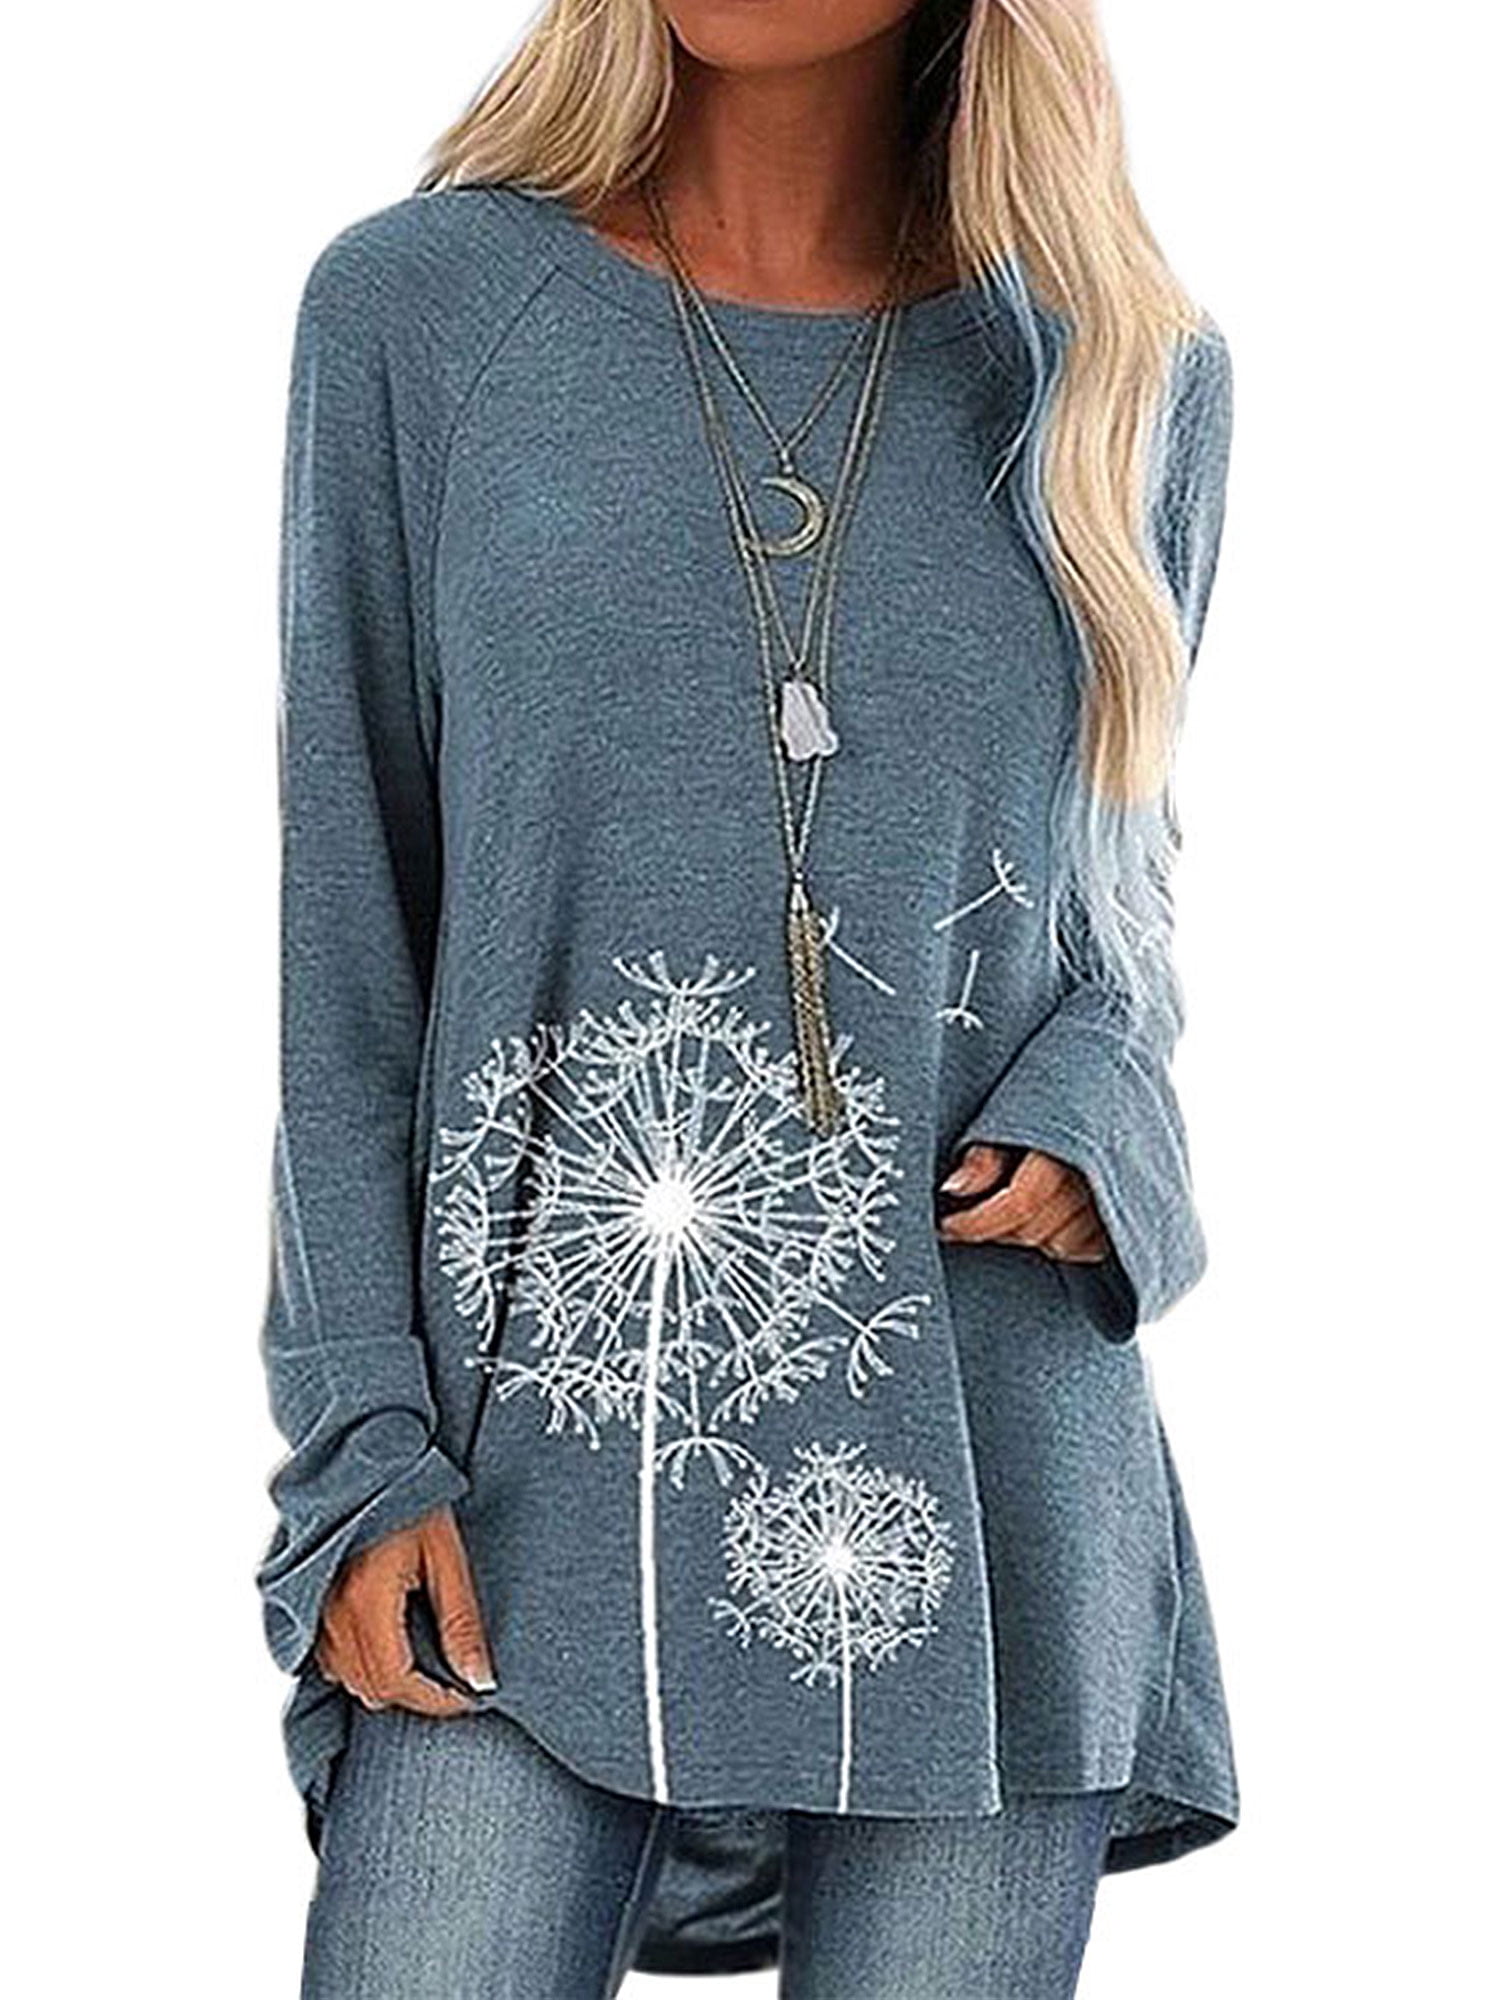 Womens Long Sleeve Blouses Shirts Off Shoulder Oversized Plus Size Loose Fit Tunic Tops Autumn Button Down Tee Tops SIN+MON 